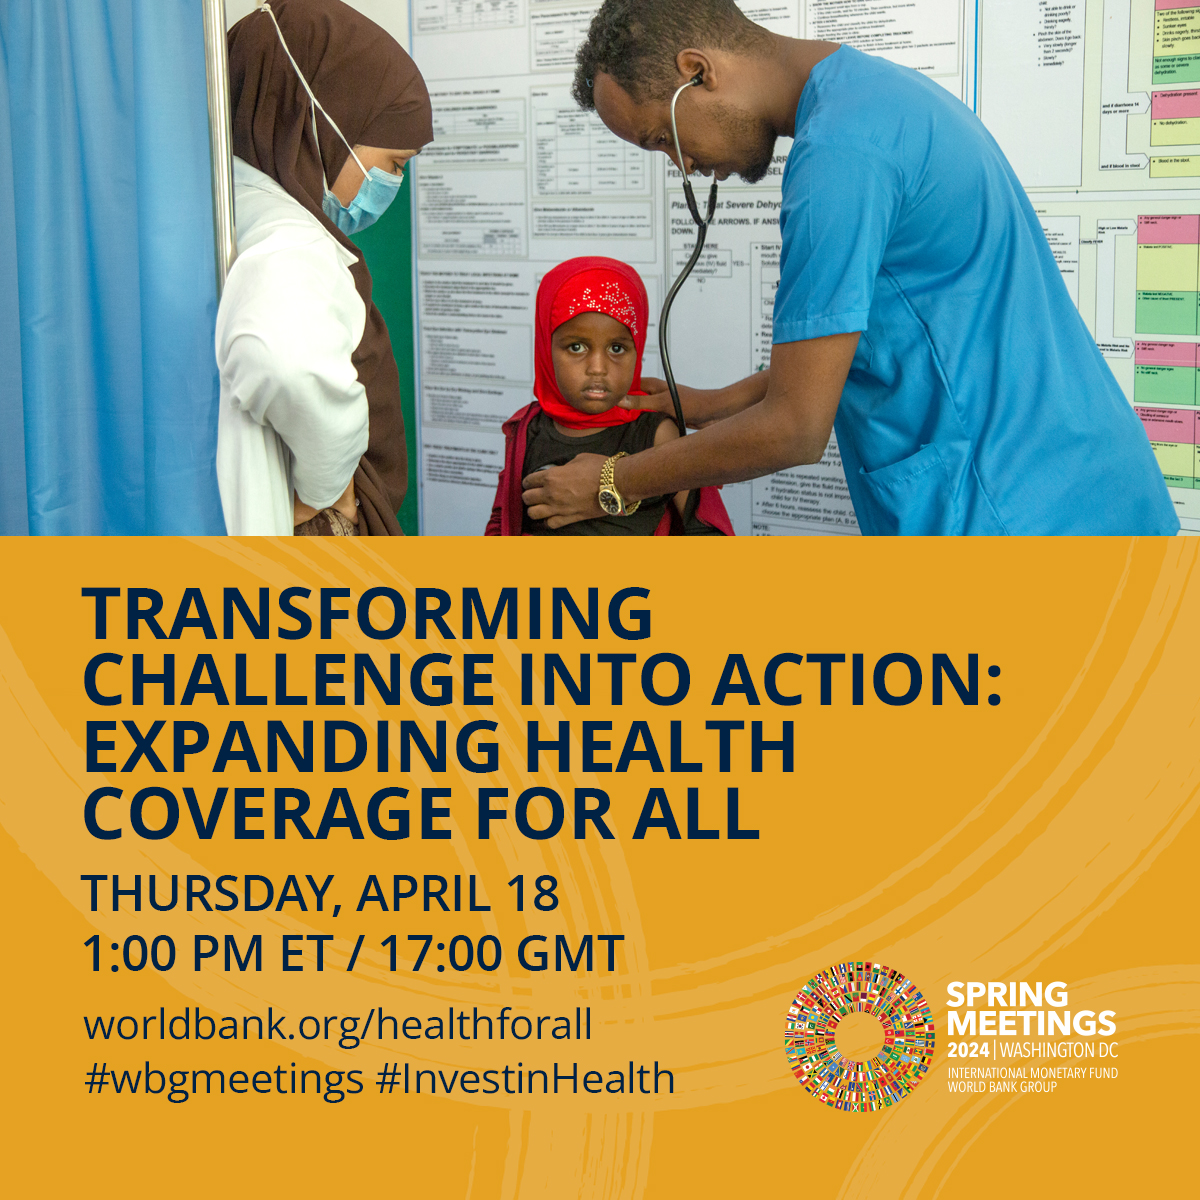 Climate change, pandemics, and a shortage of healthcare workers – the challenges are mounting. But together, we can tackle them to improve health care. Join the conversation on April 18, 1 pm ET: wrld.bg/Tr7N50RbPUx #WBGMeetings